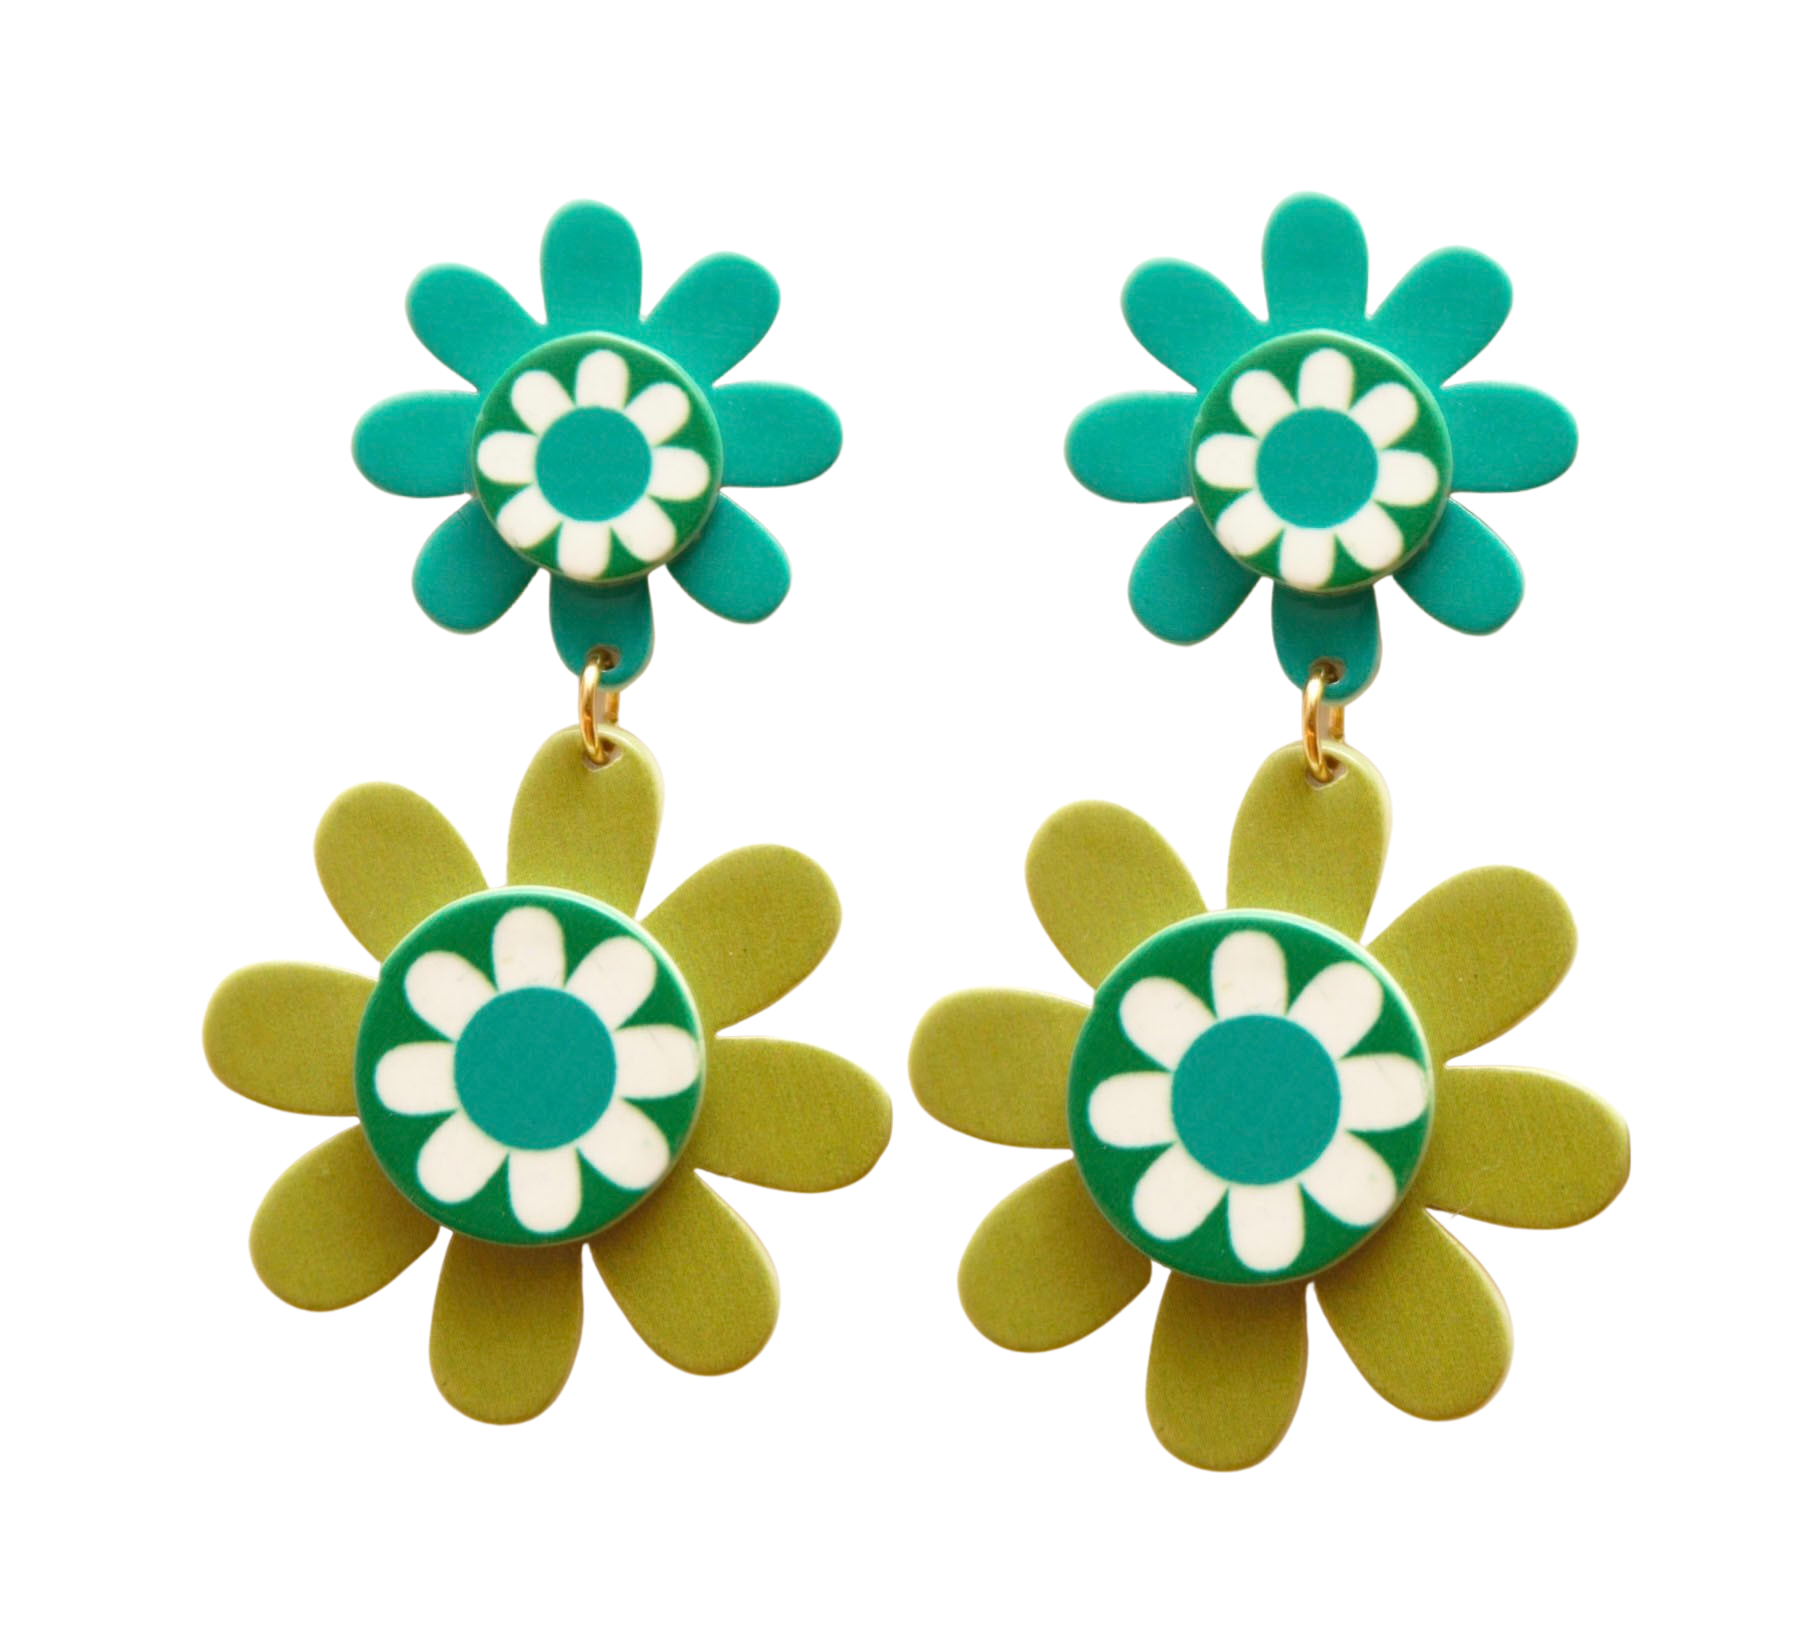 Retro Doubles Blue and Green Flower Earrings Groovy Girl - Relic828